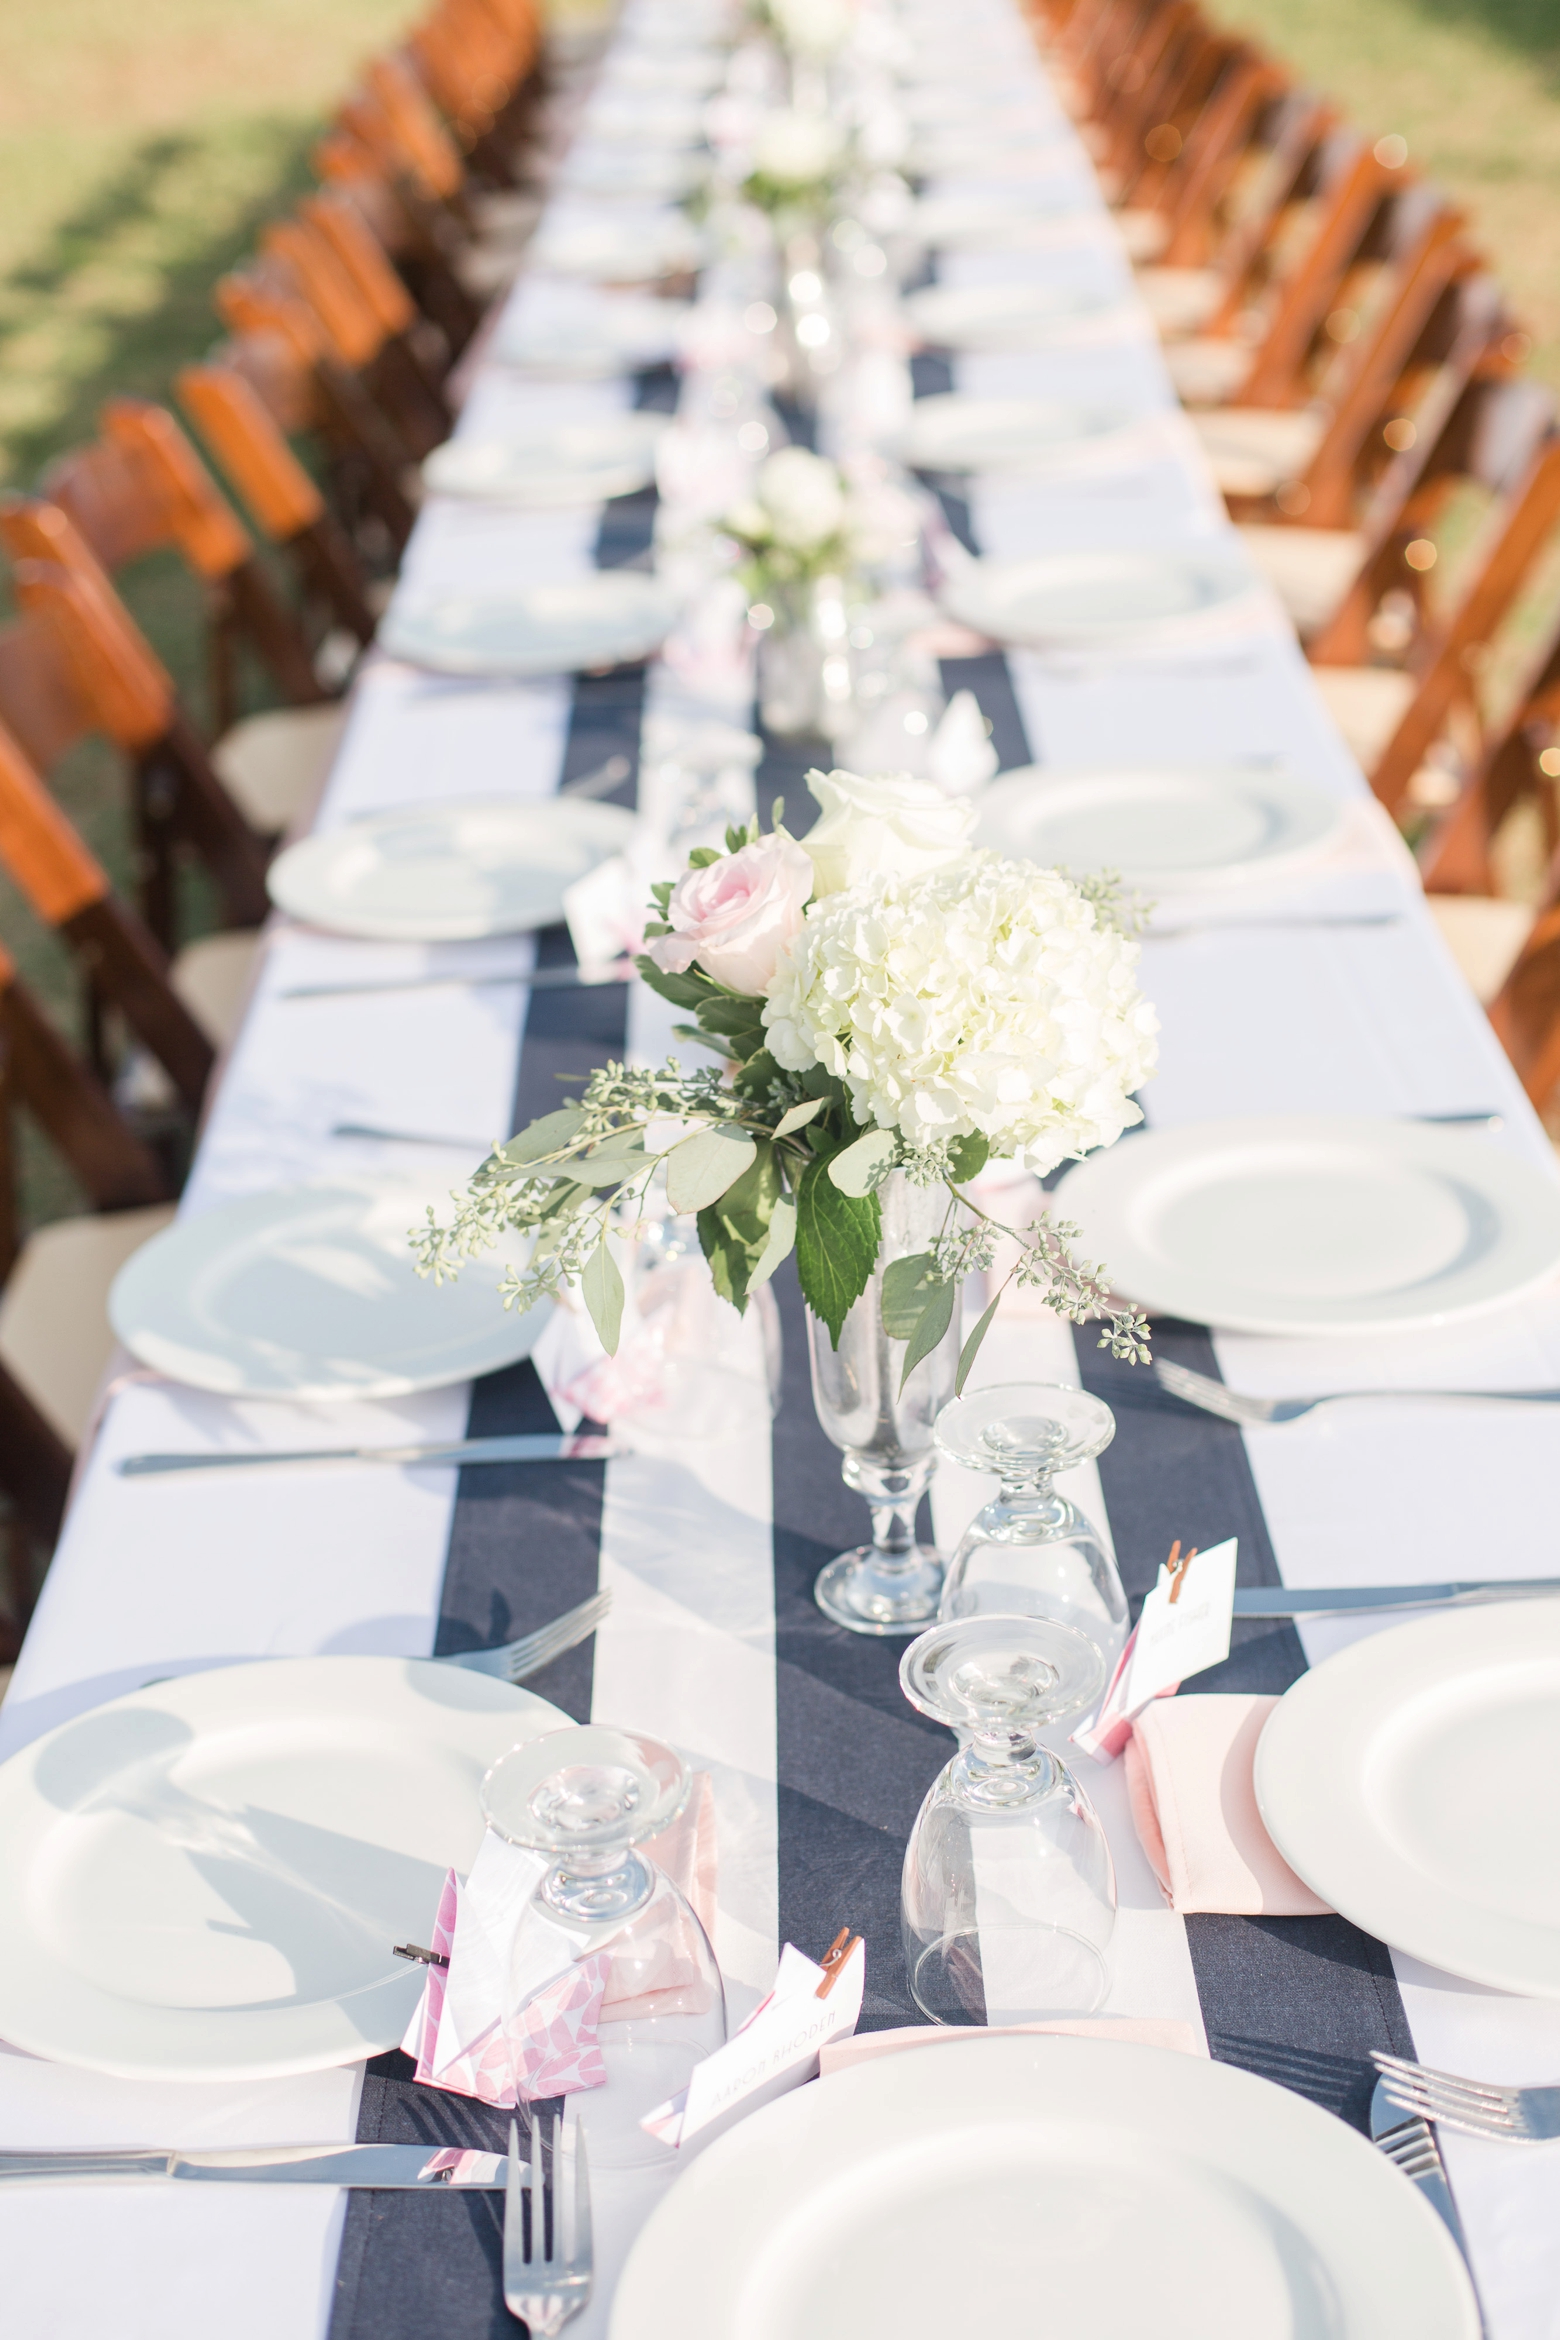 Wedding Planning Advice from a Bride | Plan a Welcome Event - Angie ...